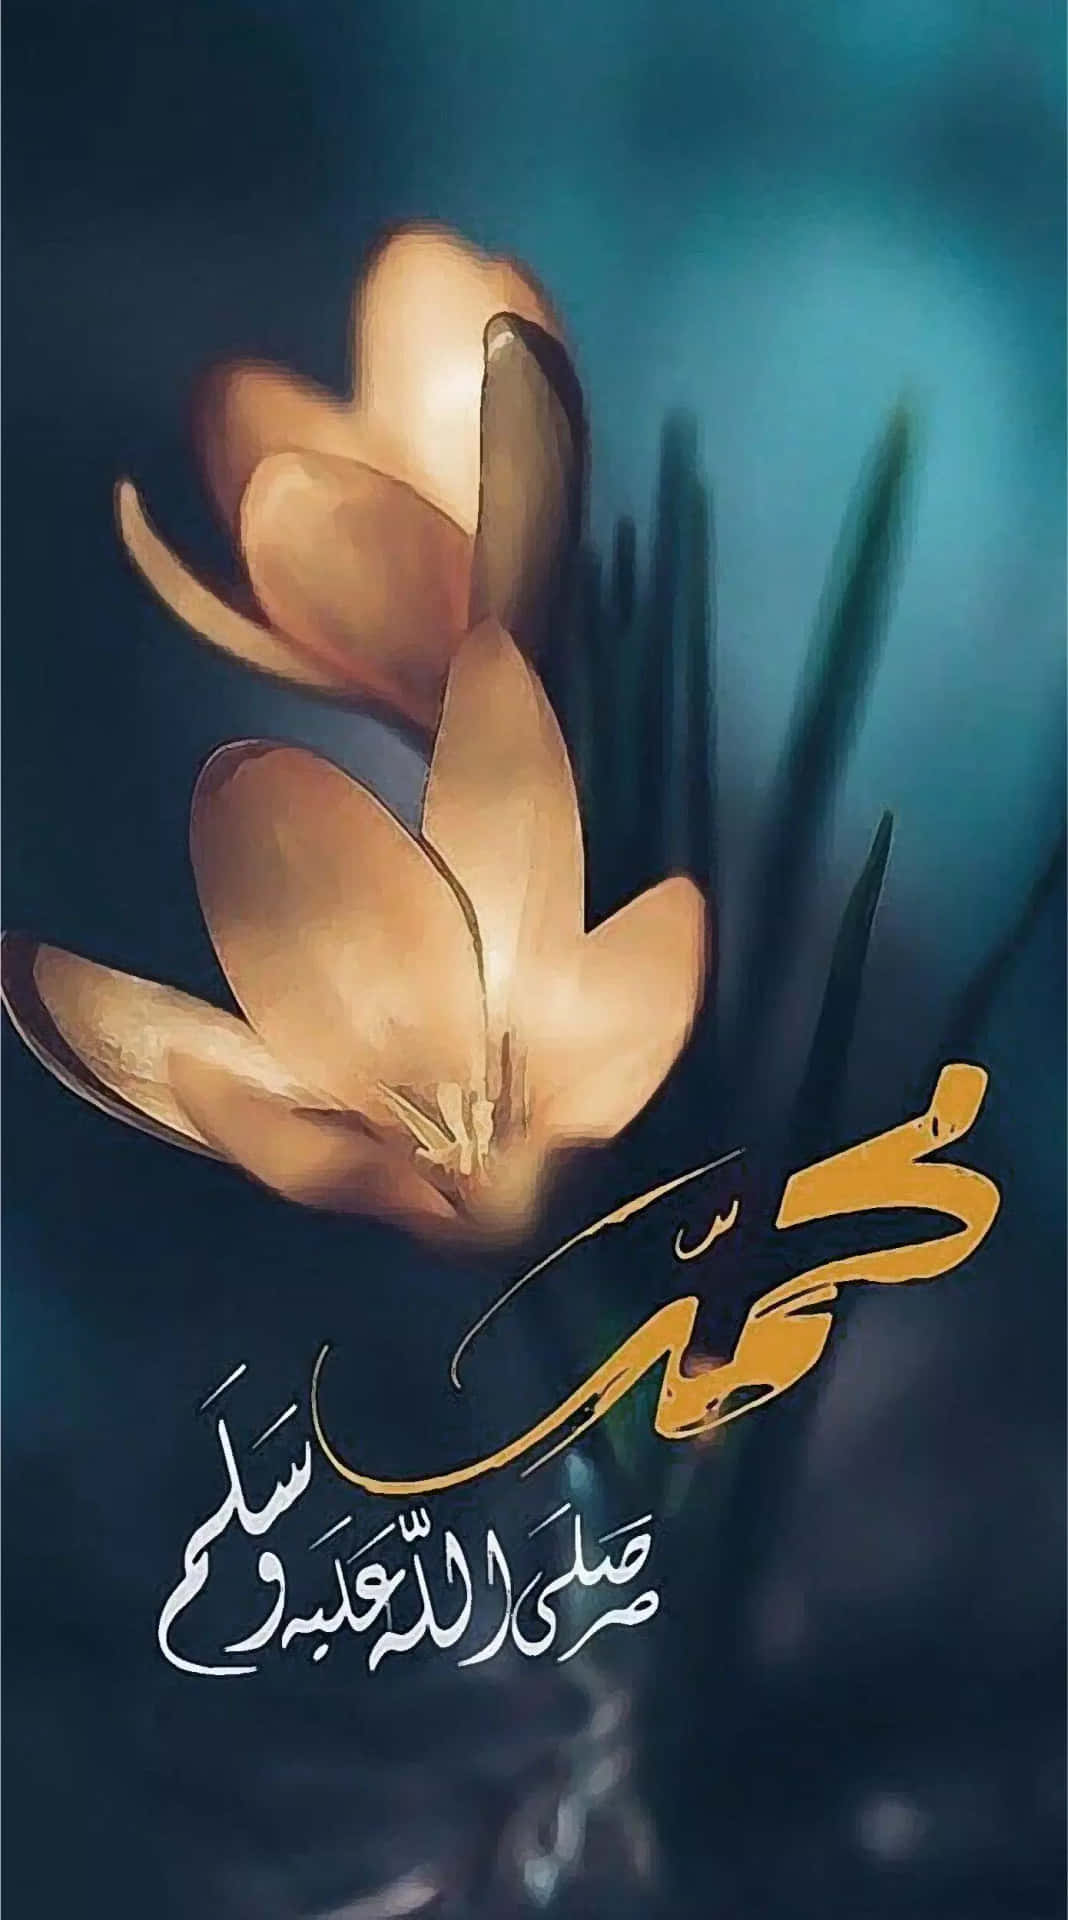 A Poster With Flowers And Arabic Writing Wallpaper